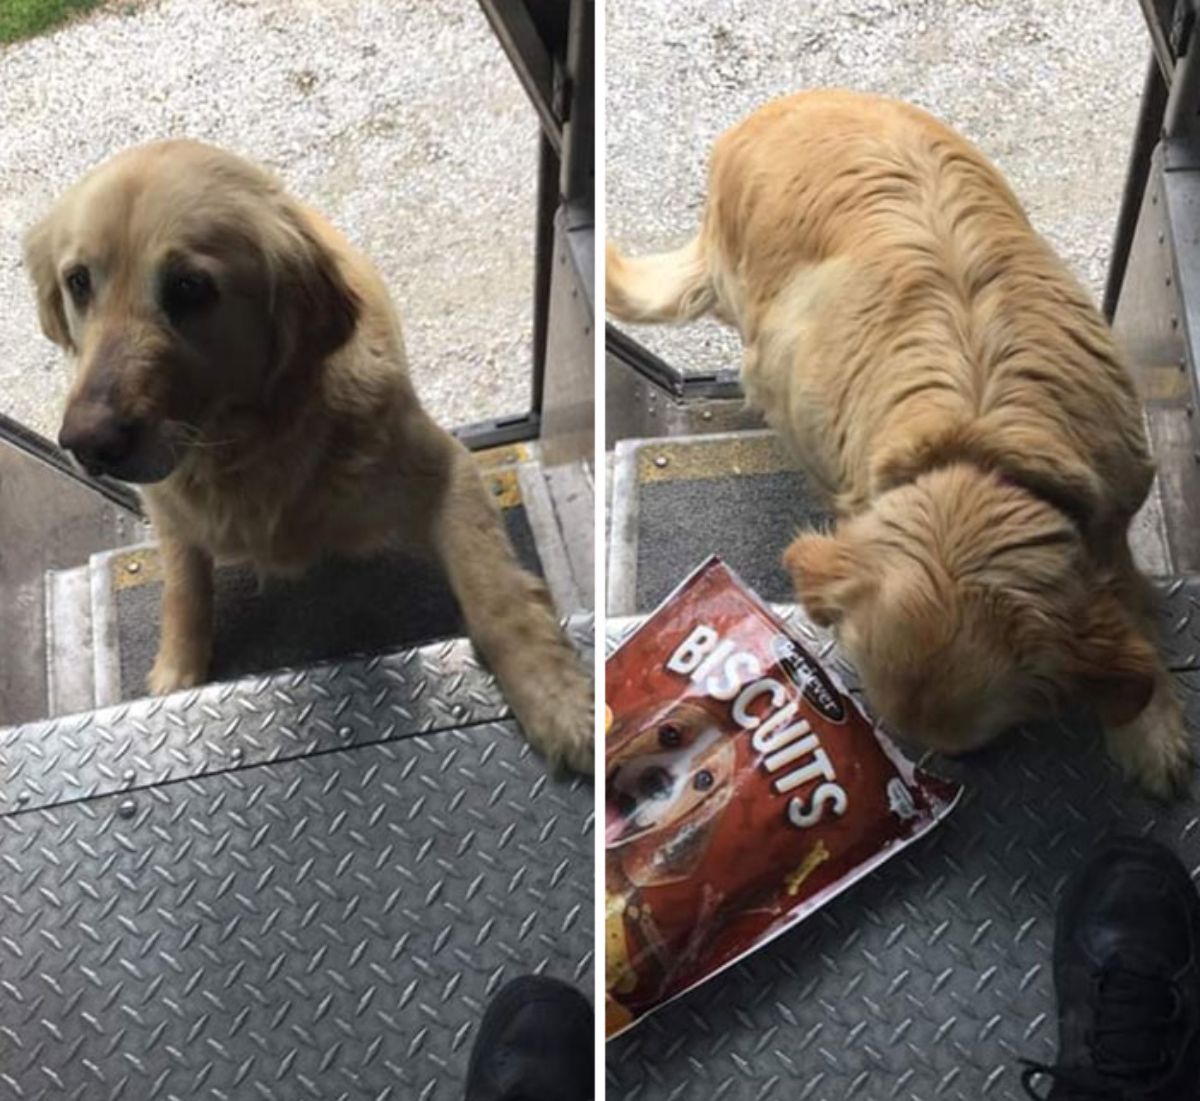 2 photos of a golden retriever standing on the stairs of a ups truck and getting a treat